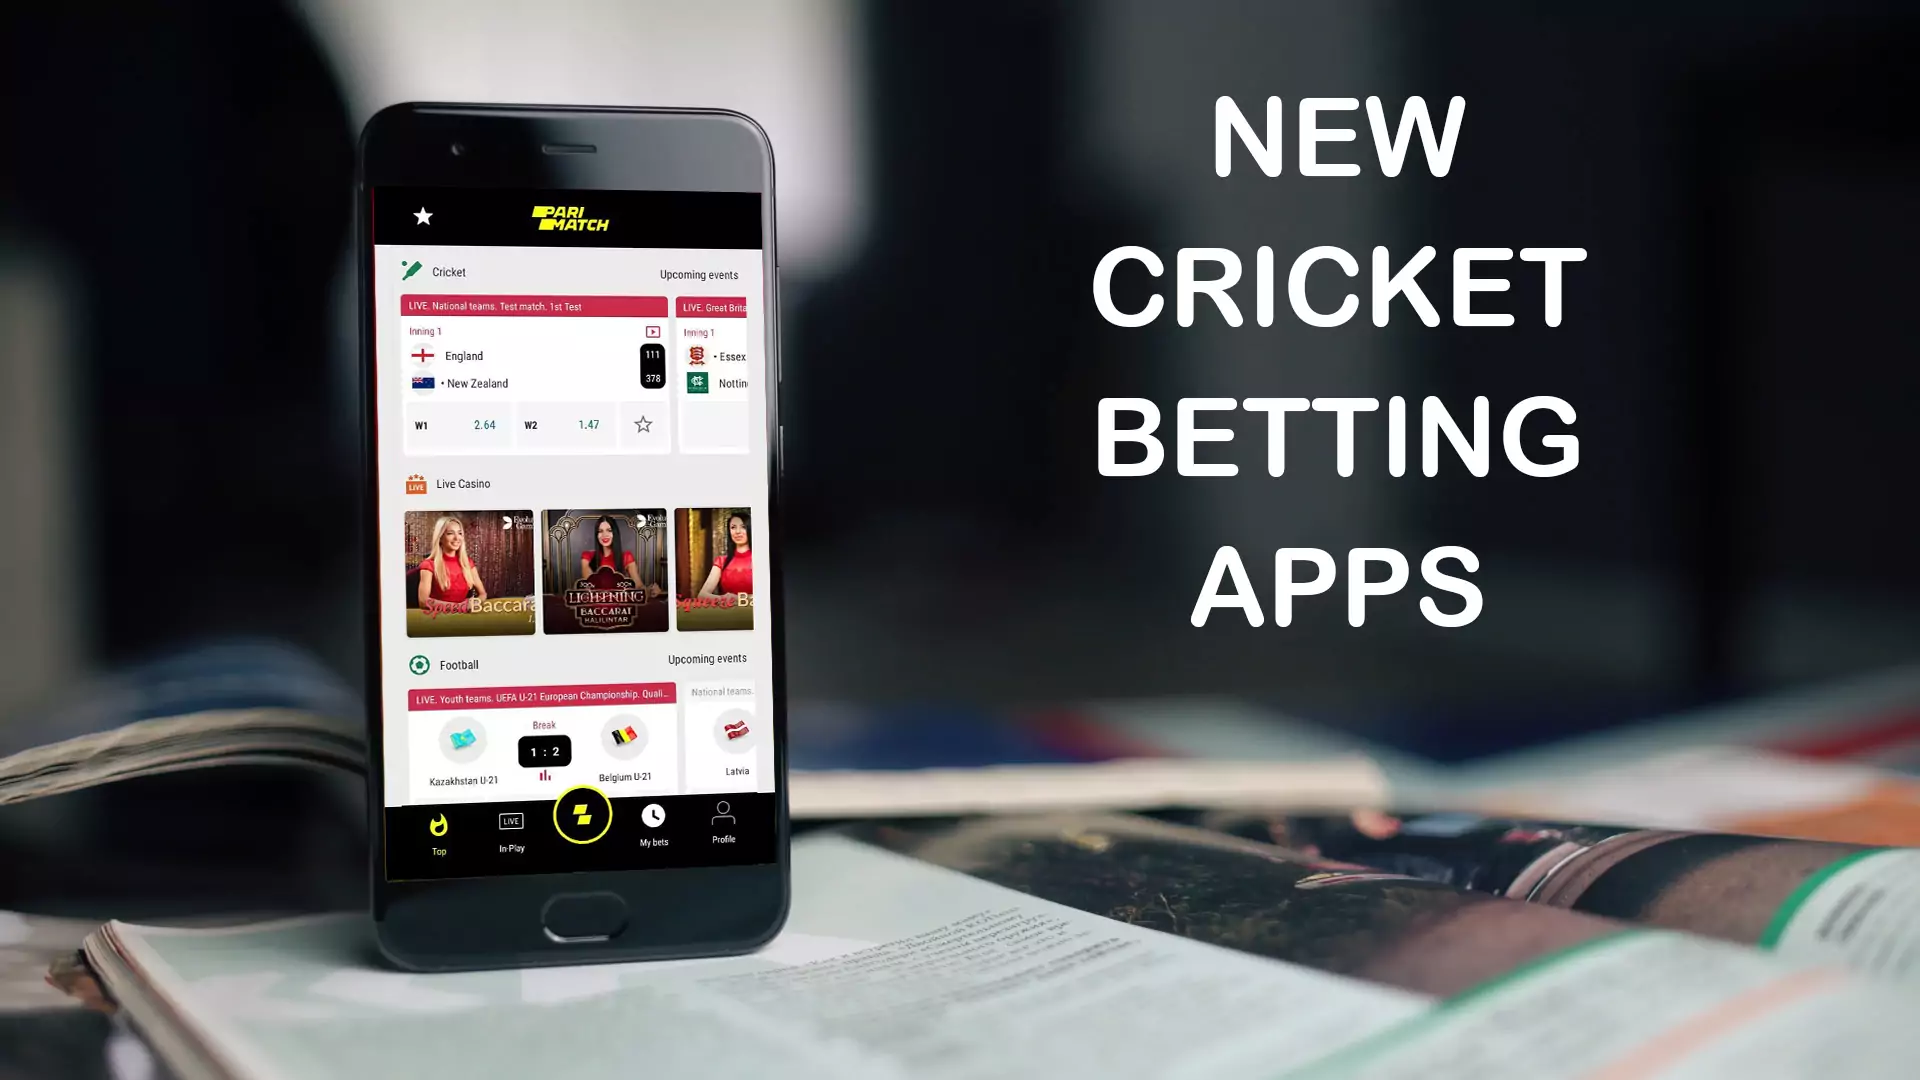 Check out the rankings of new cricket betting apps for Indian users.